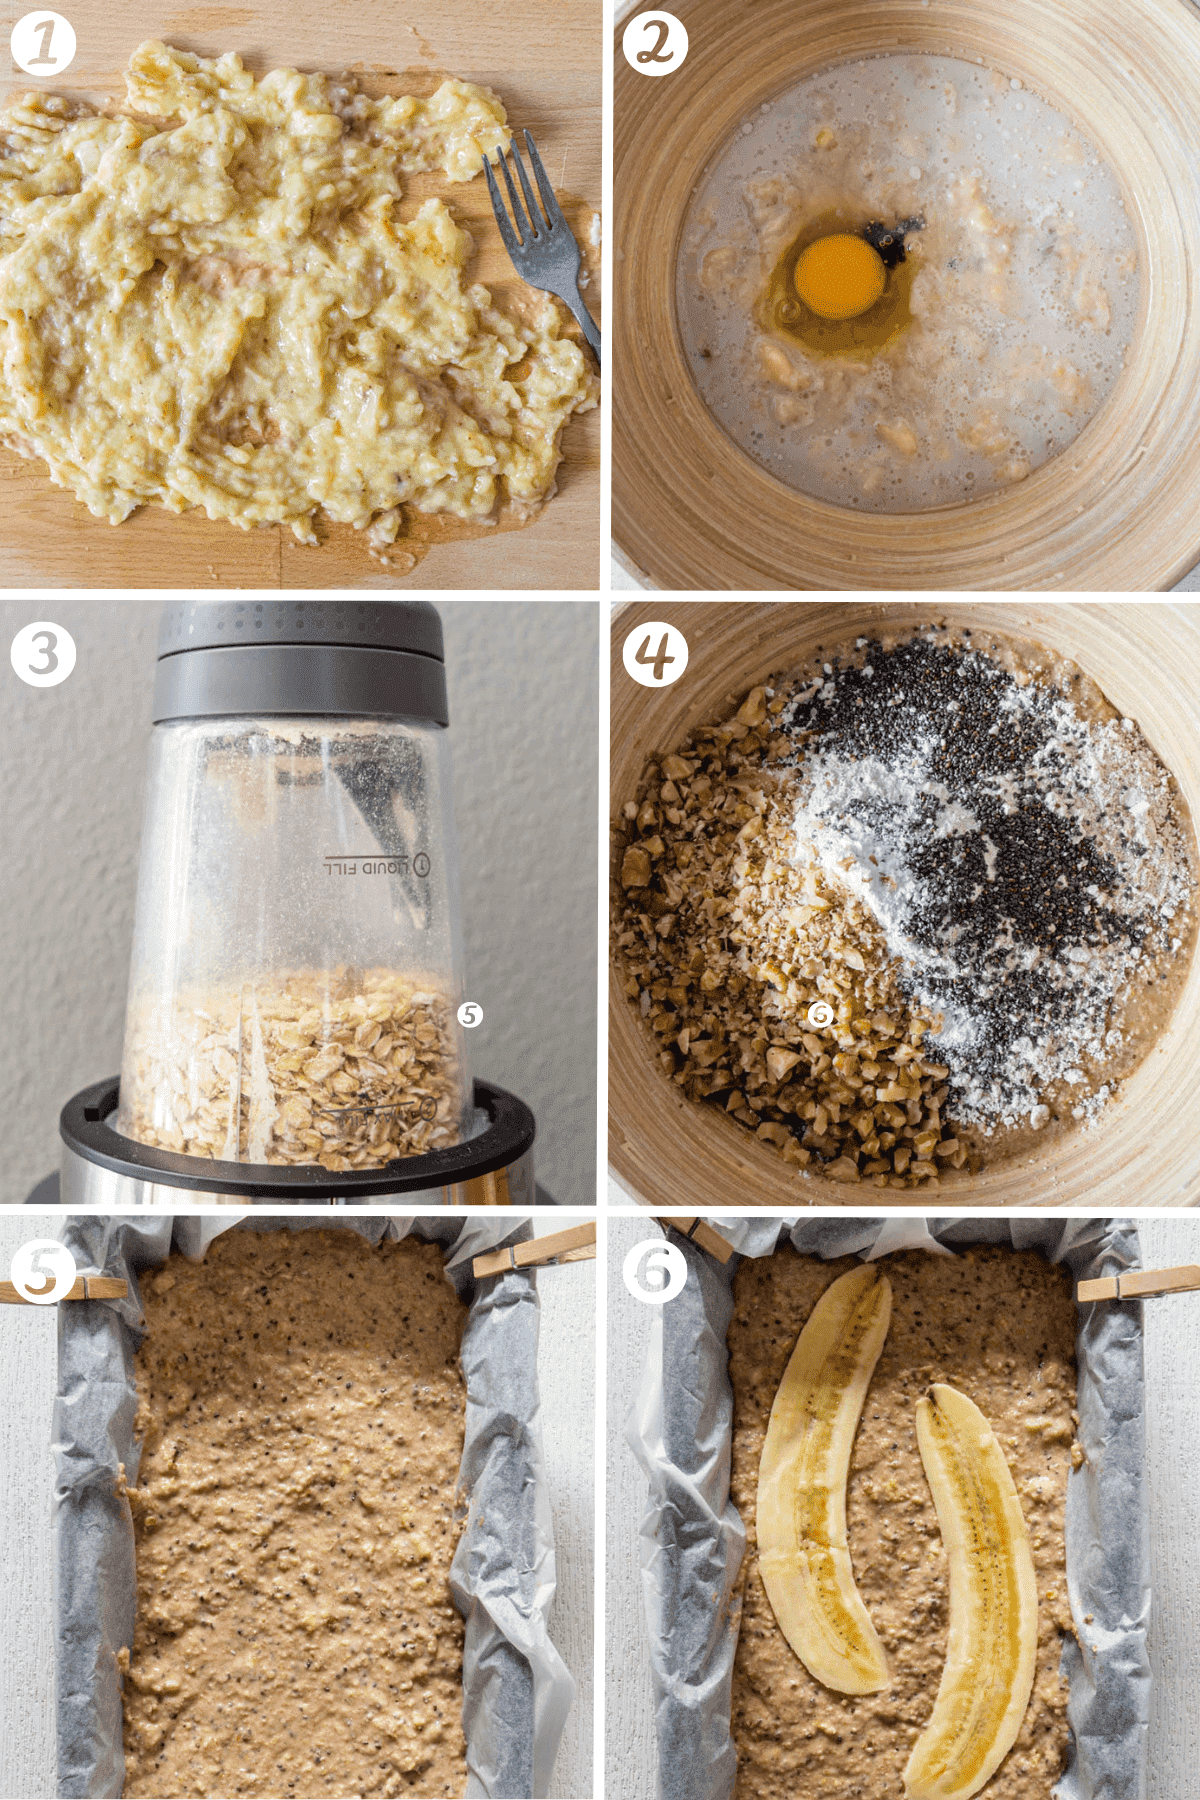 Steps on how to make Healthy Banana Bread